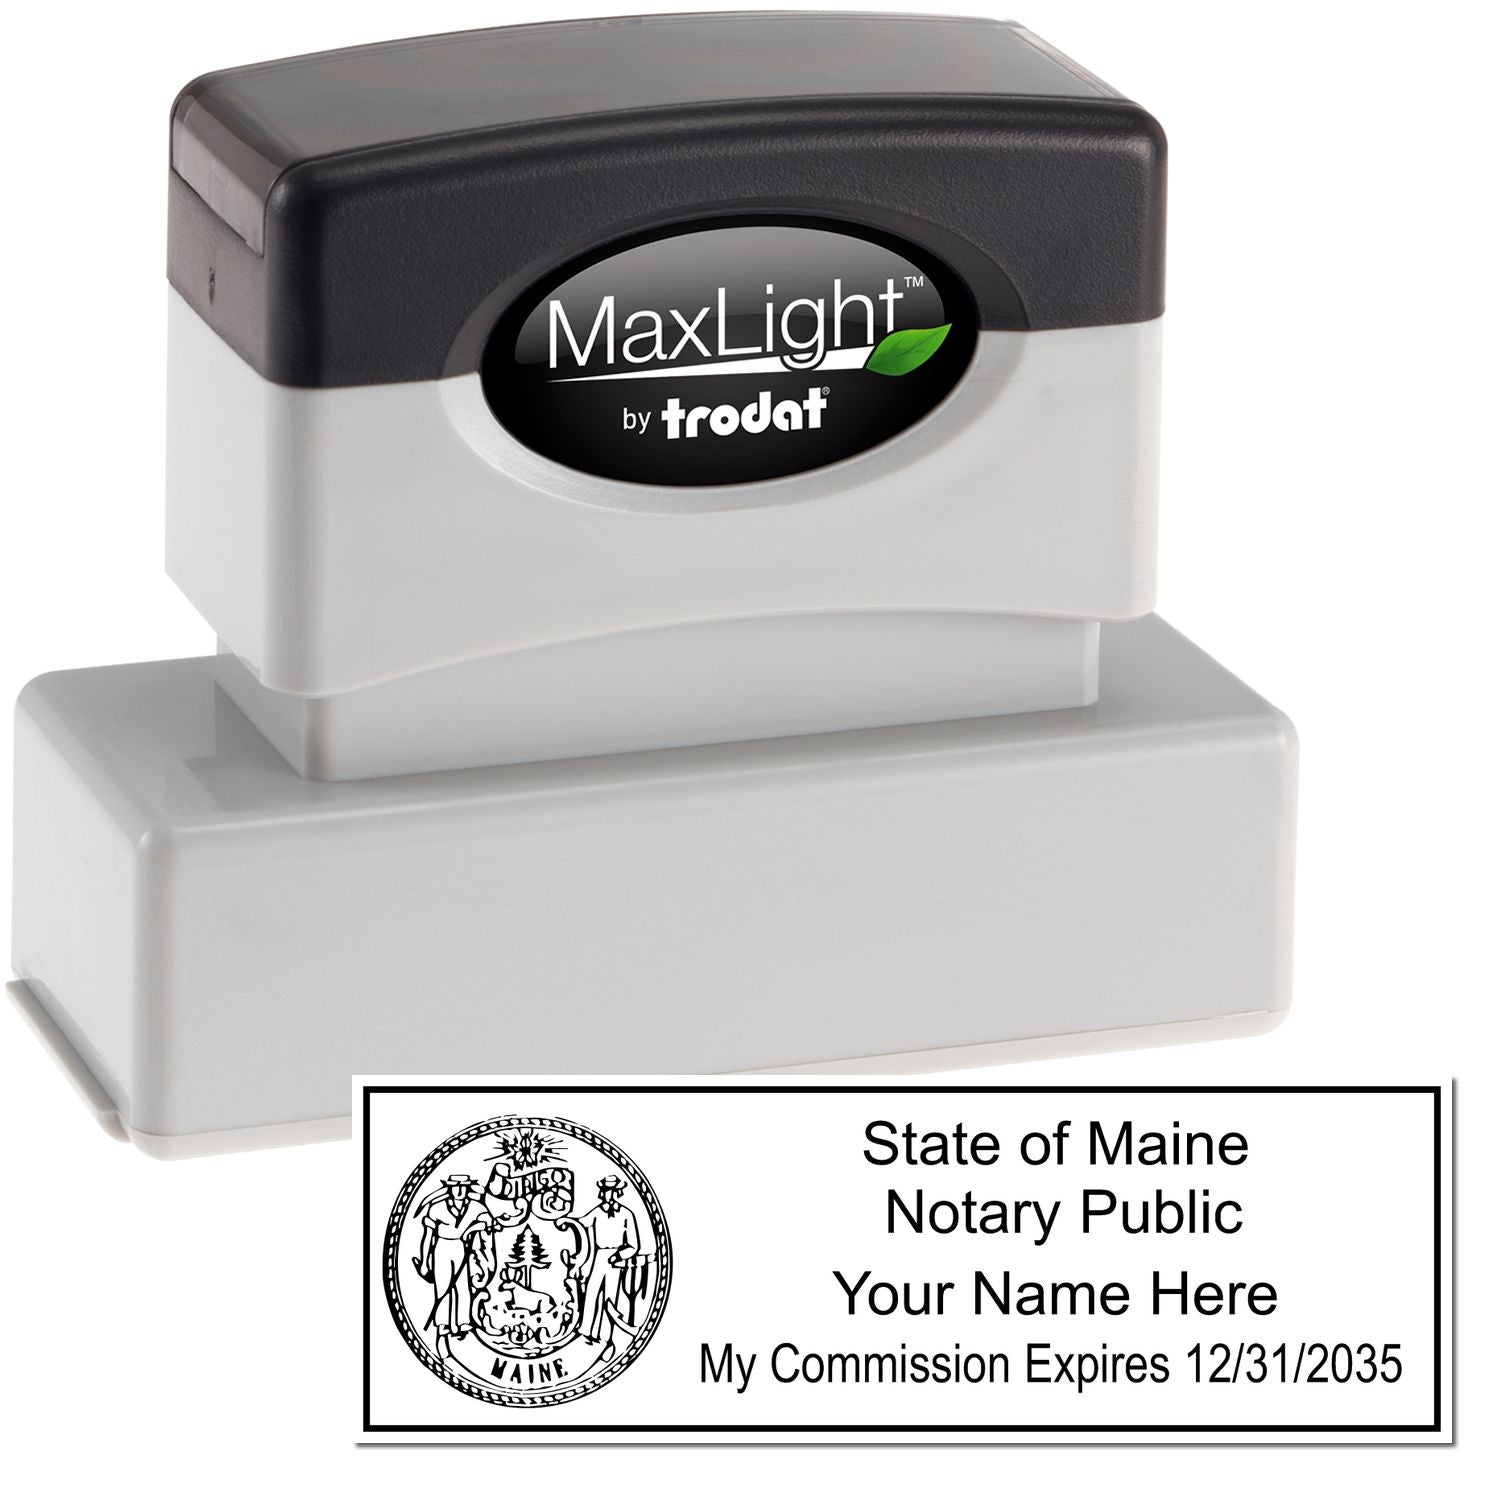 The main image for the MaxLight Premium Pre-Inked Maine State Seal Notarial Stamp depicting a sample of the imprint and electronic files